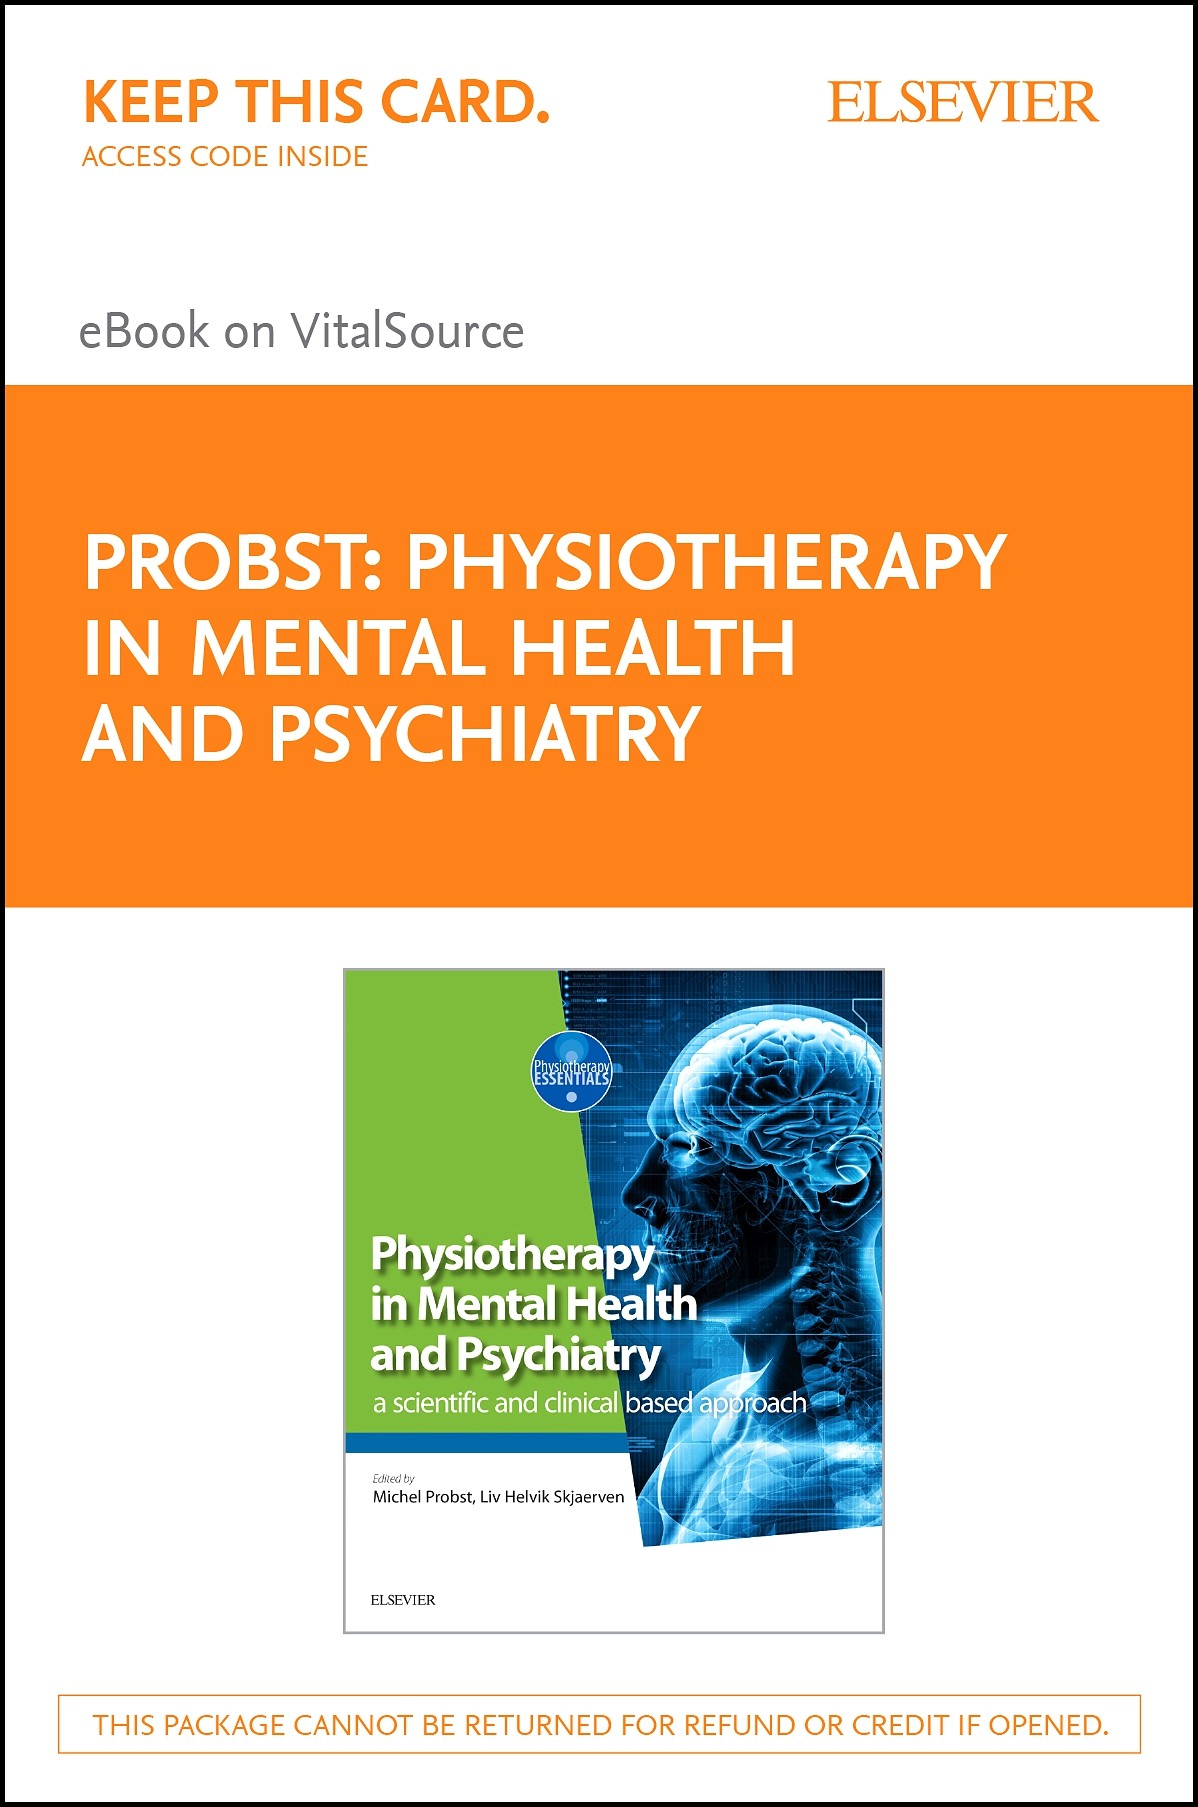 Physiotherapy in Mental Health and Psychiatry E-Book